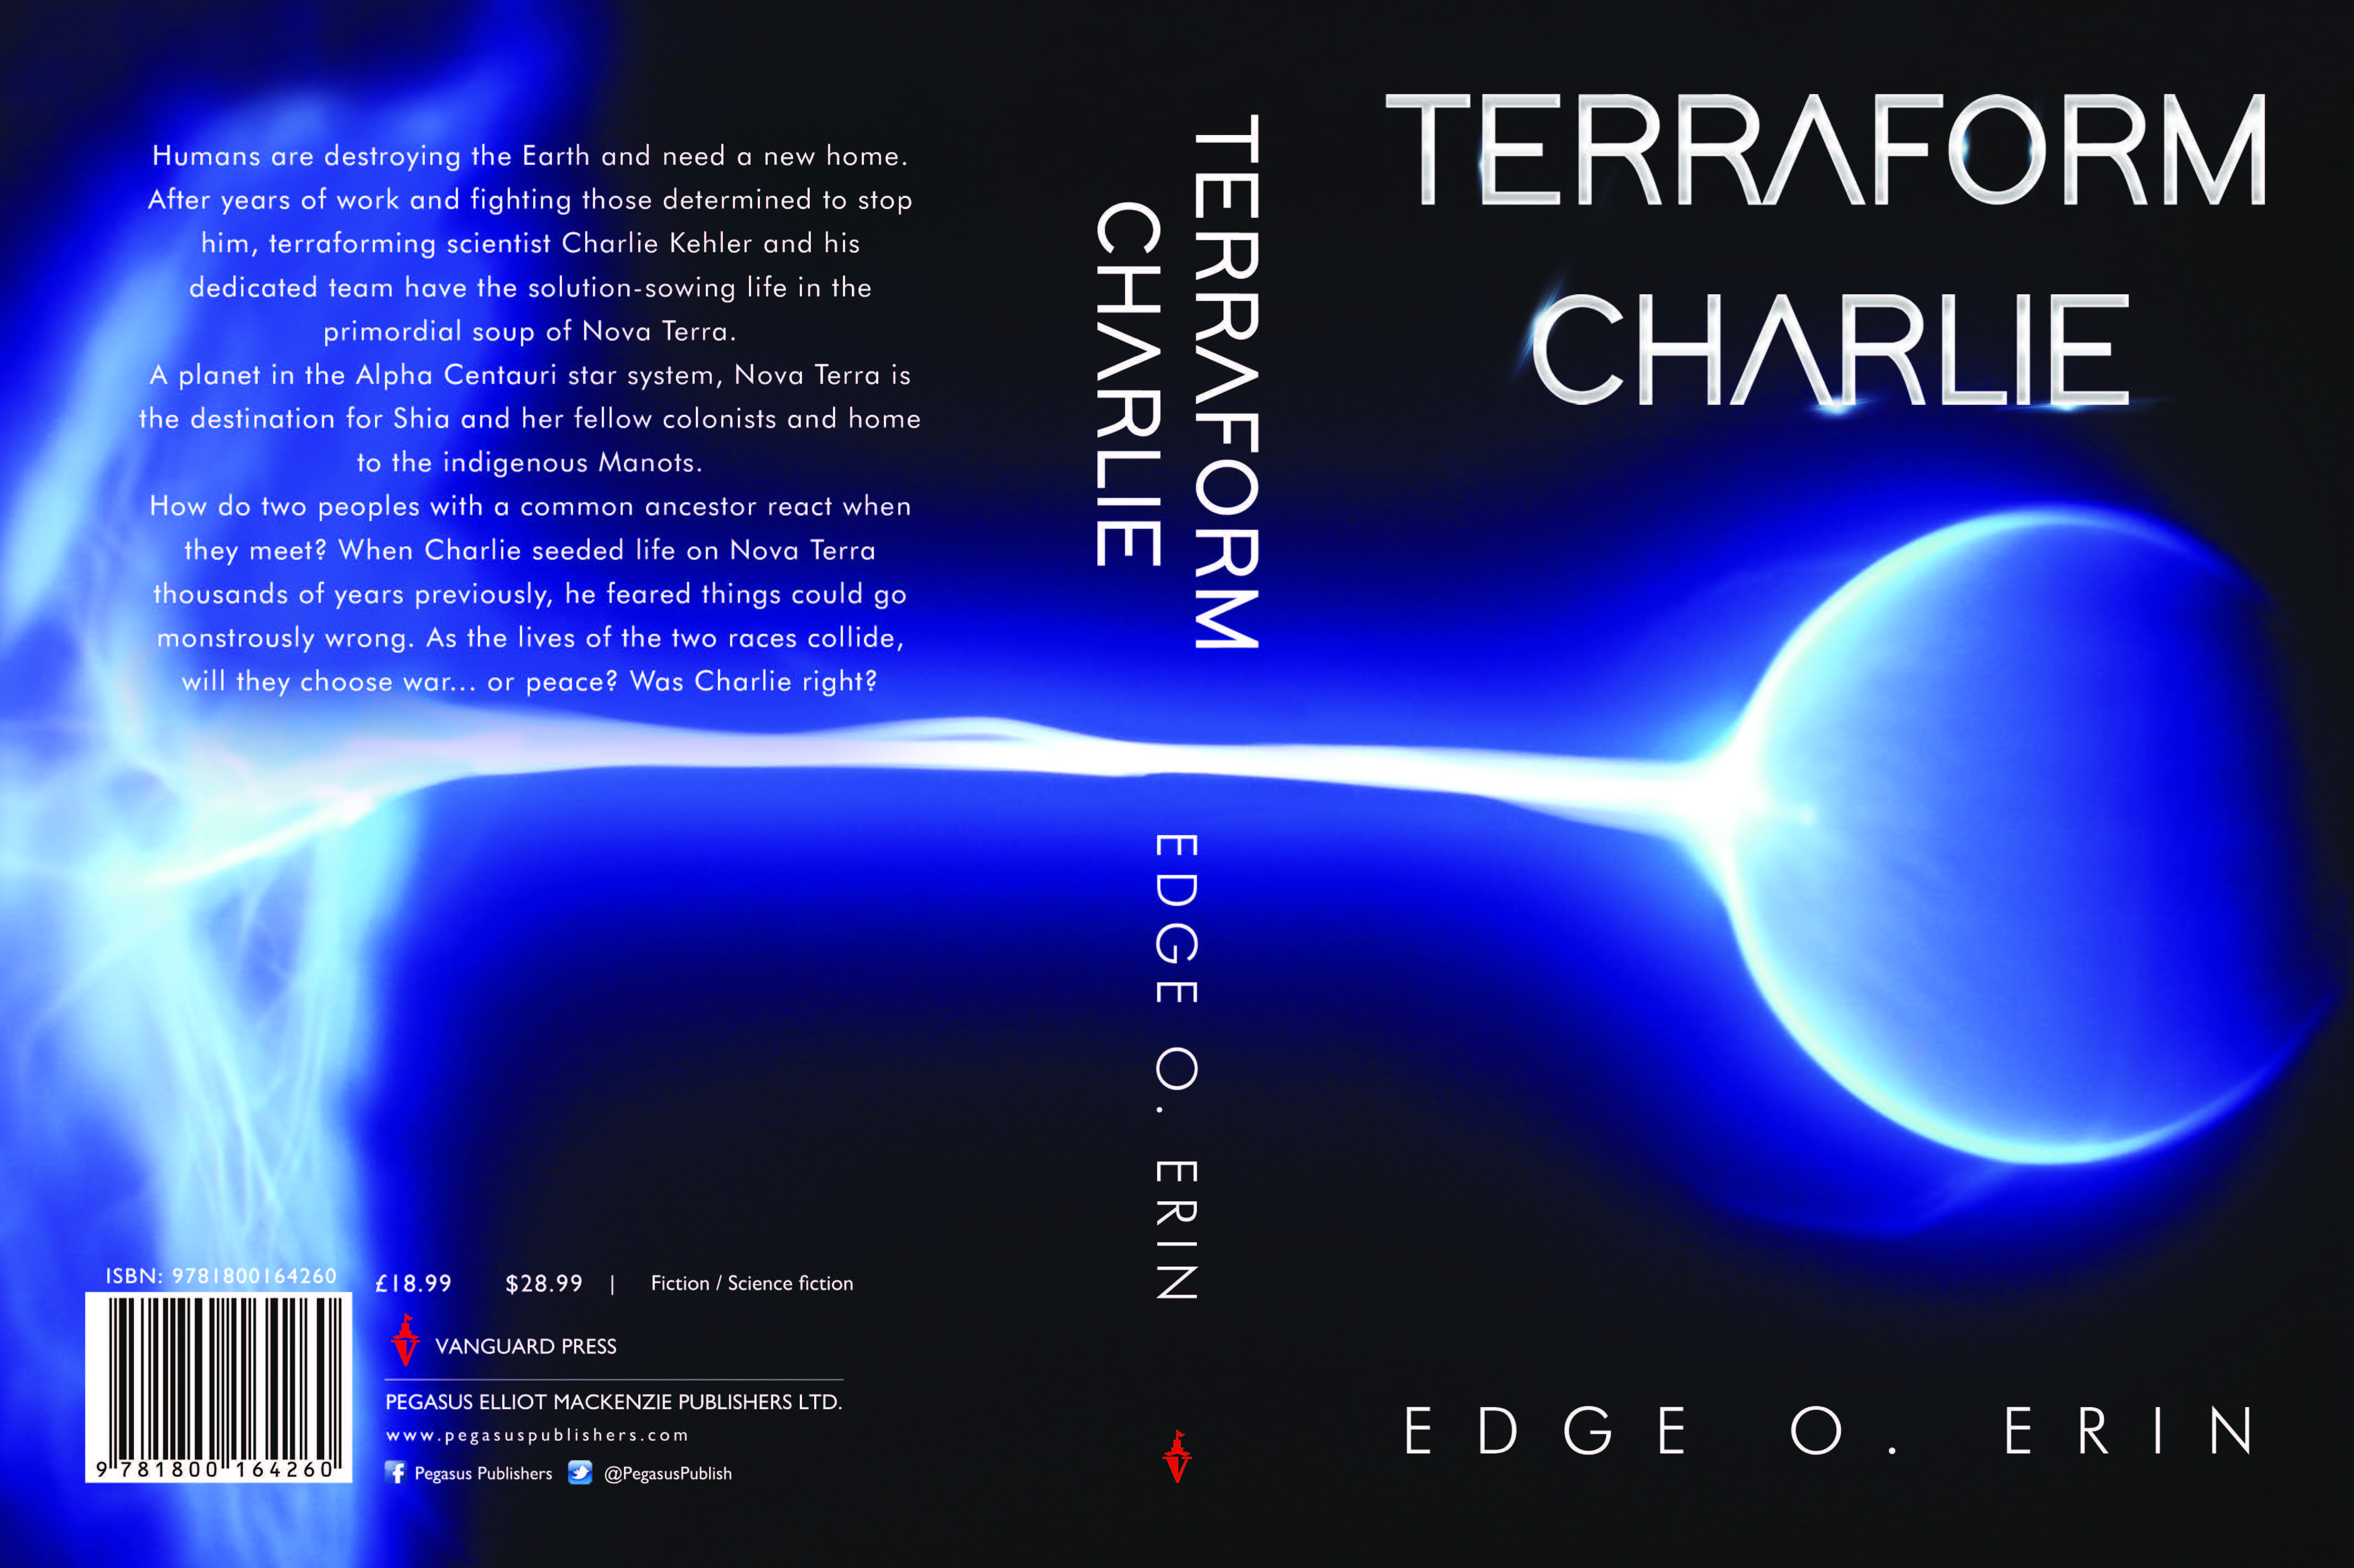 Full cover image of the sci-fi book, Terraform Charlie